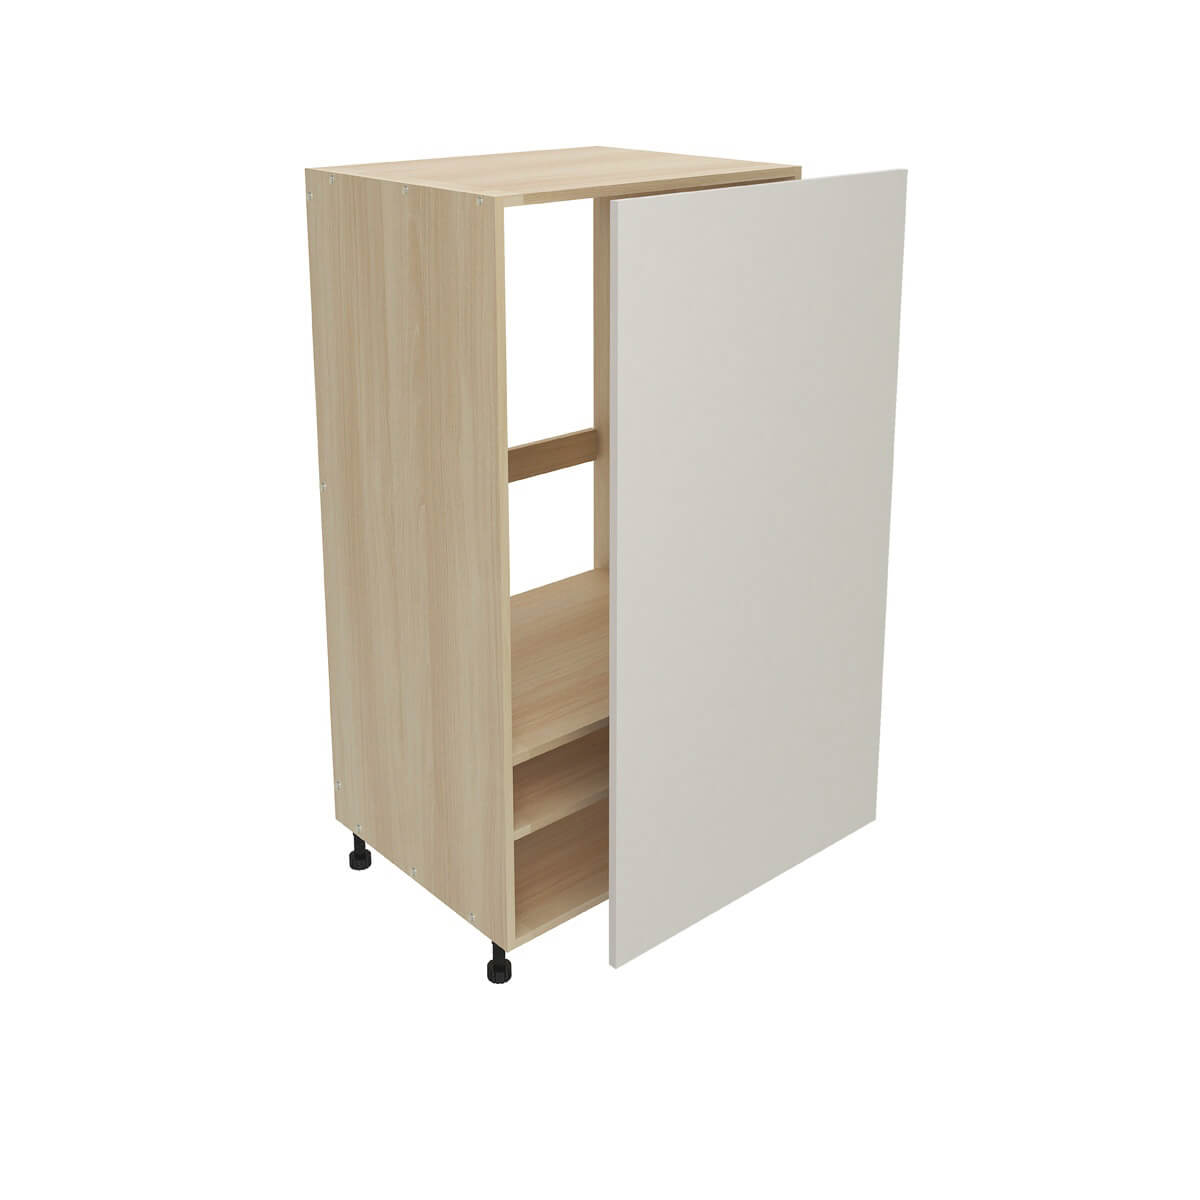 BASE FACE FRAME DOUBLE CABINET | BFFD - OXFORD WHITE (LQ-21704)